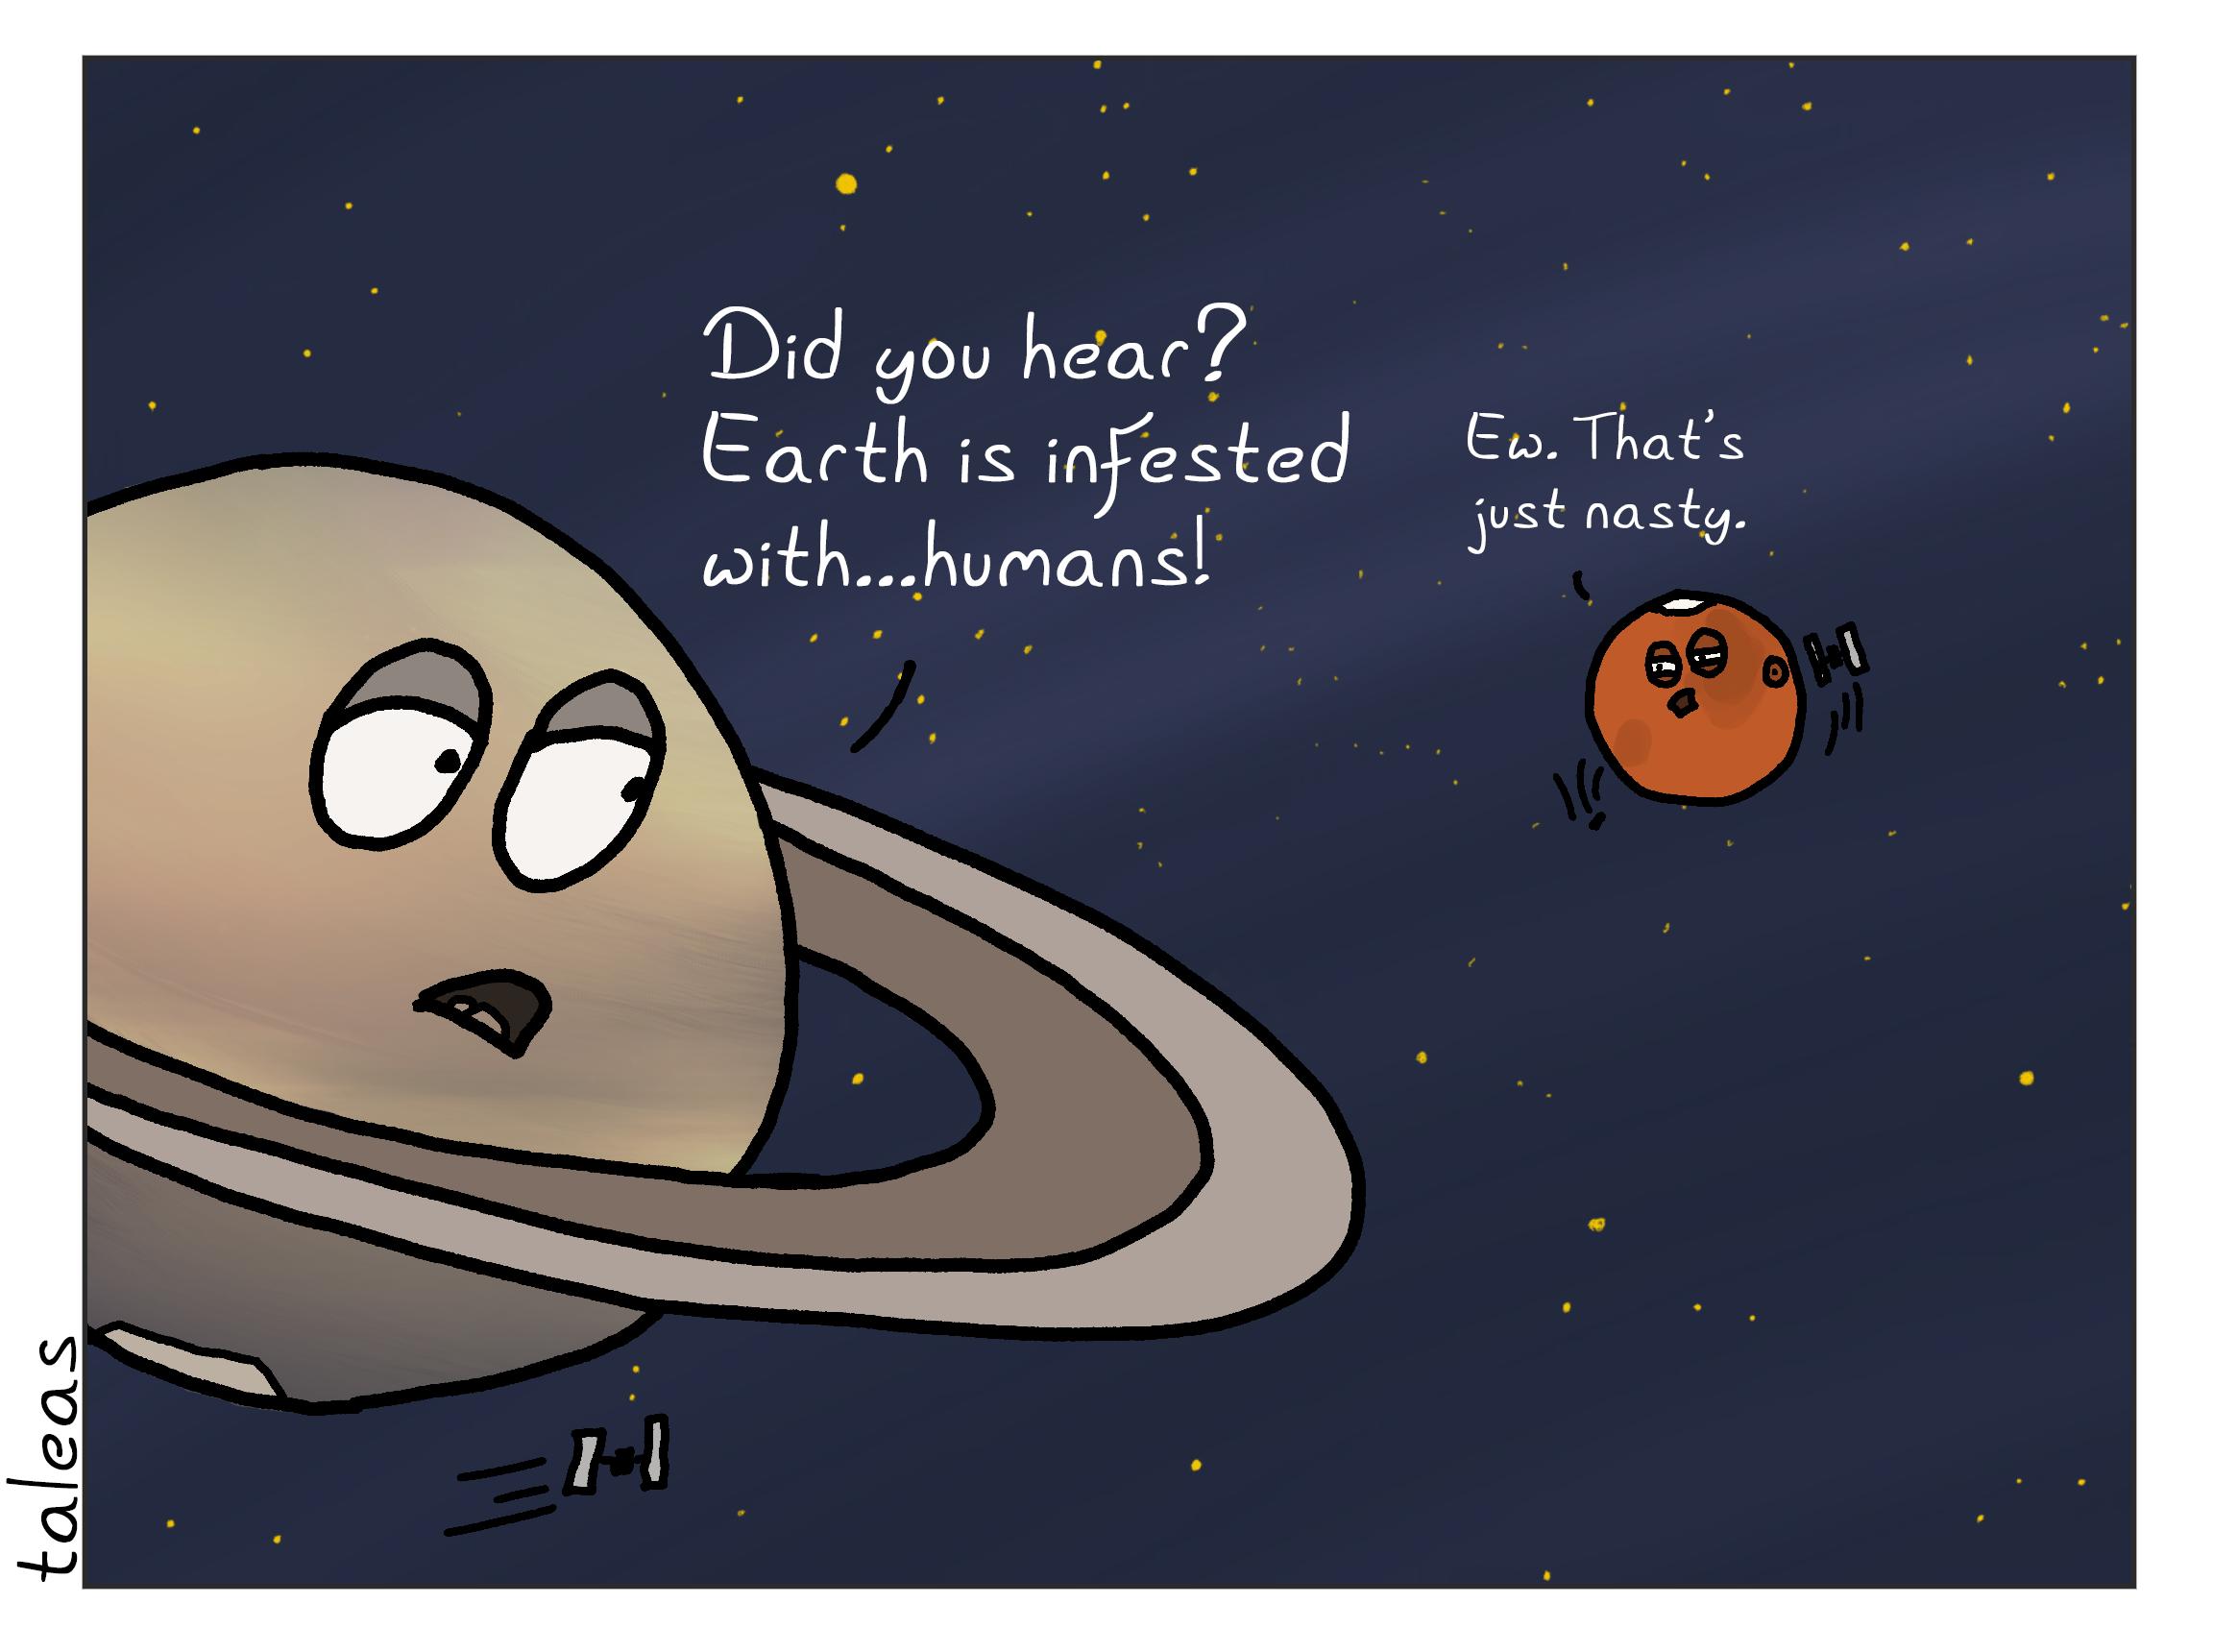 The planet Saturn, leaning in to Mars (don't ask questions...it's a comic not an Astronomical Chart) saying, "Did you hear? Earth is infested with...humans!" Mars replies, "Ew. That's just nasty." Meanwhile, both planets are being orbited by man-made satellites.